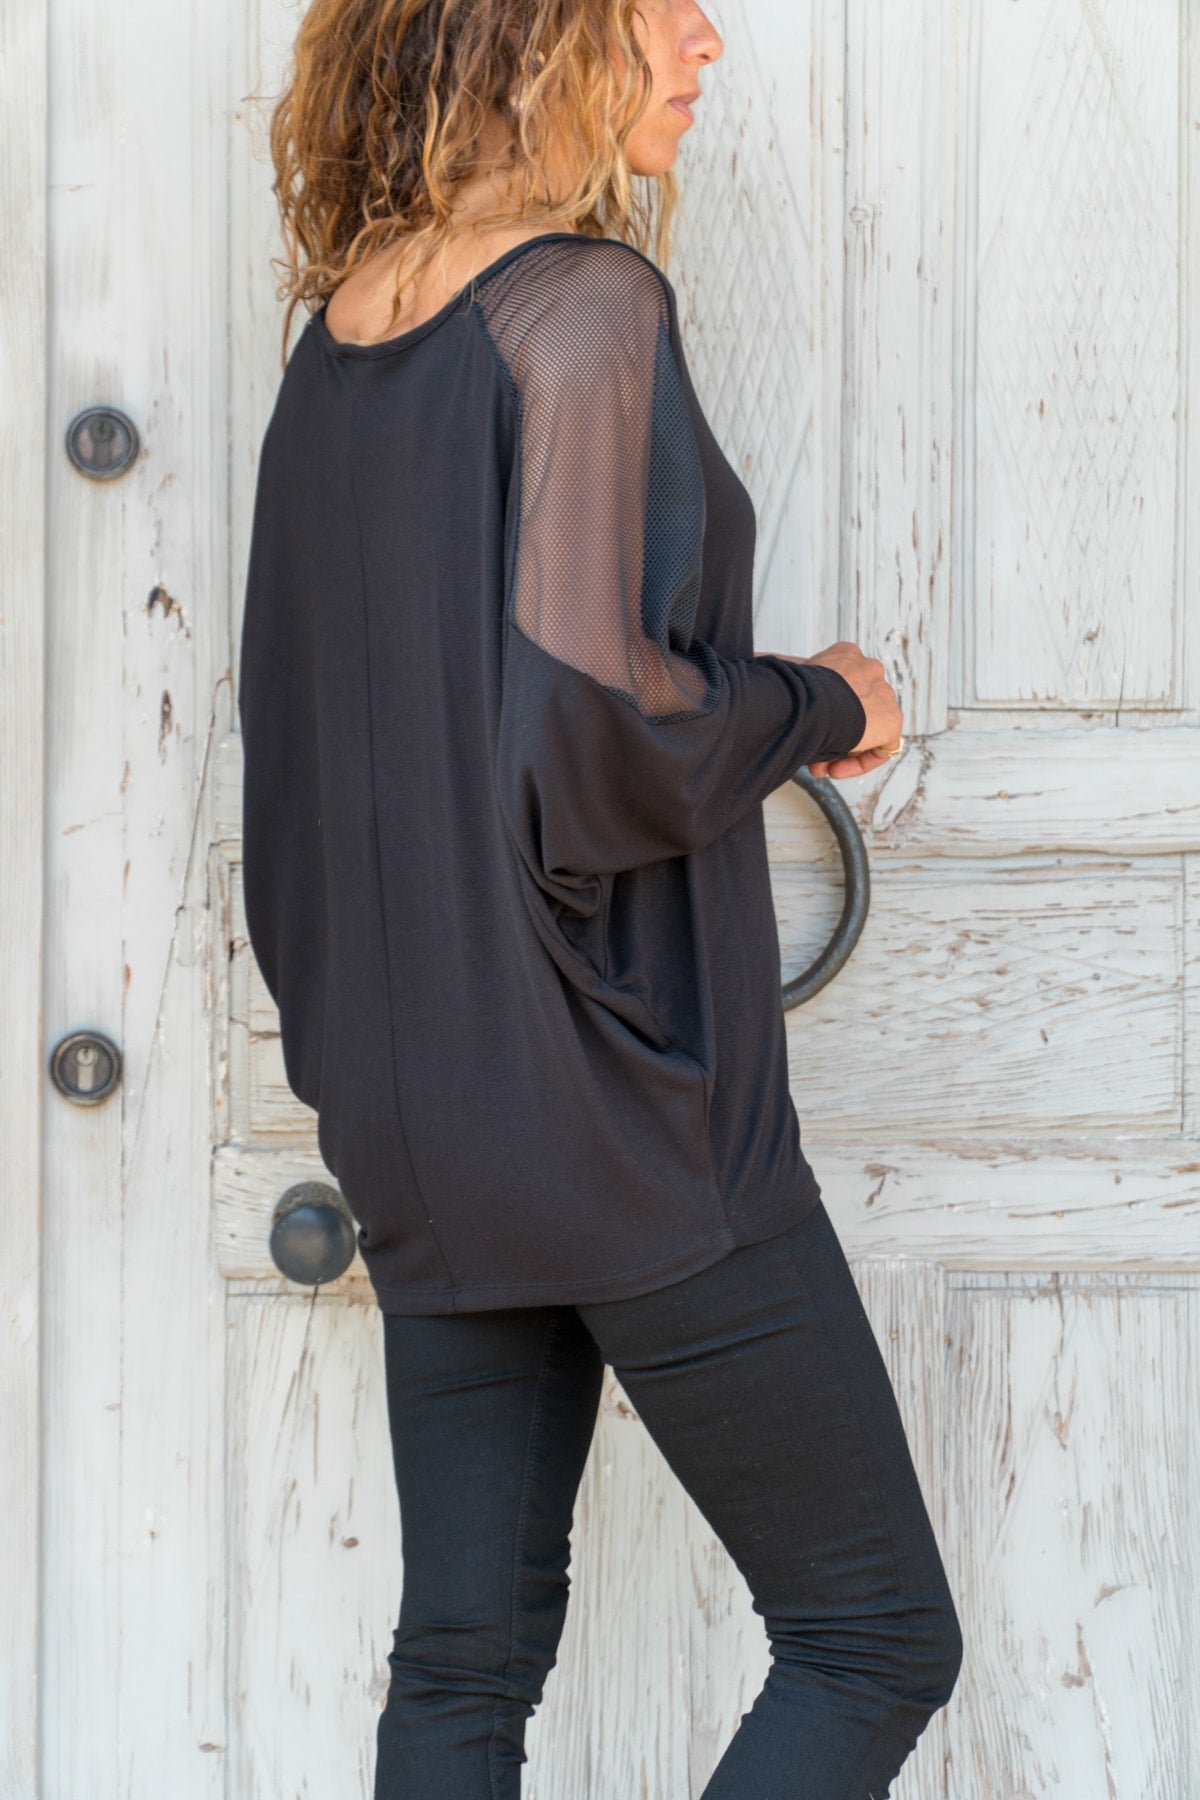 Black Women's Blouse - Elegant and Comfortable with Wide Round Neck, Long Sleeves, and Flowy Tulle Sleeve Detail